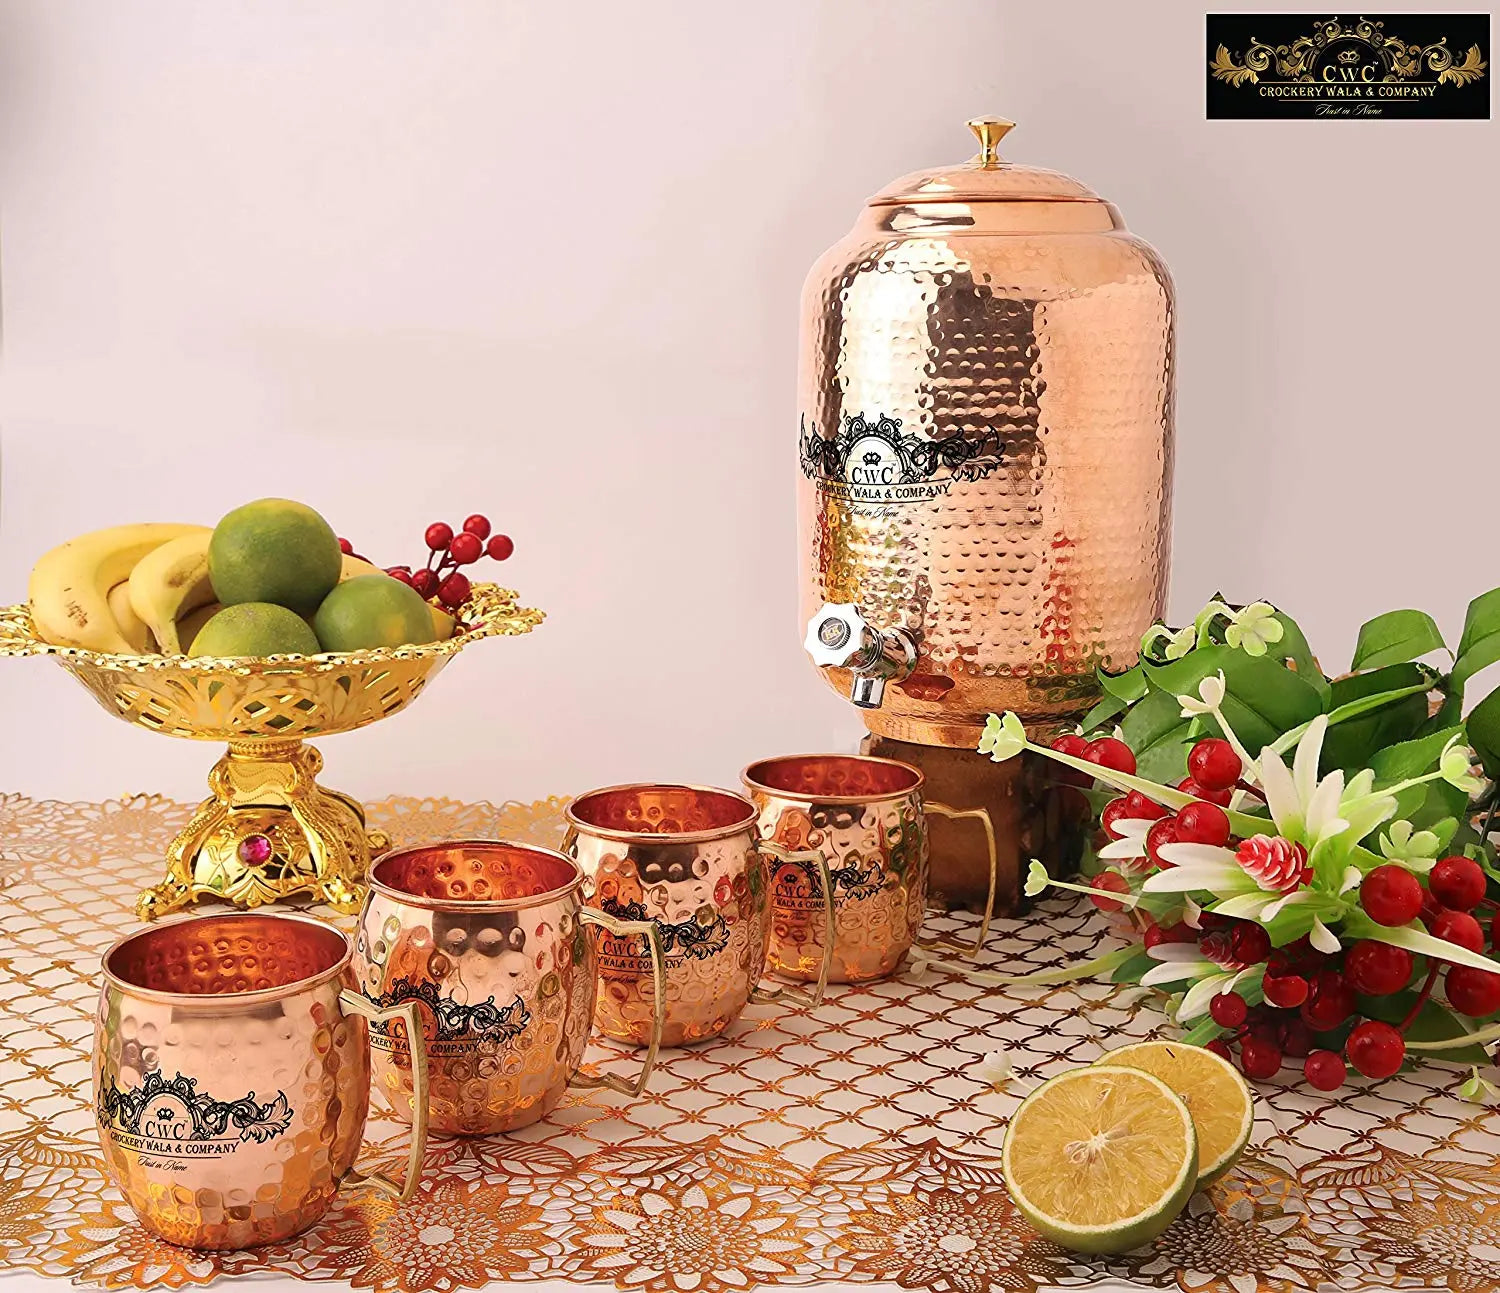 CROCKERY WALA AND COMPANY Jointless 8 Ltr Copper Water Dispenser and 4 Hammered Barrel Mugs - CROCKERY WALA AND COMPANY 